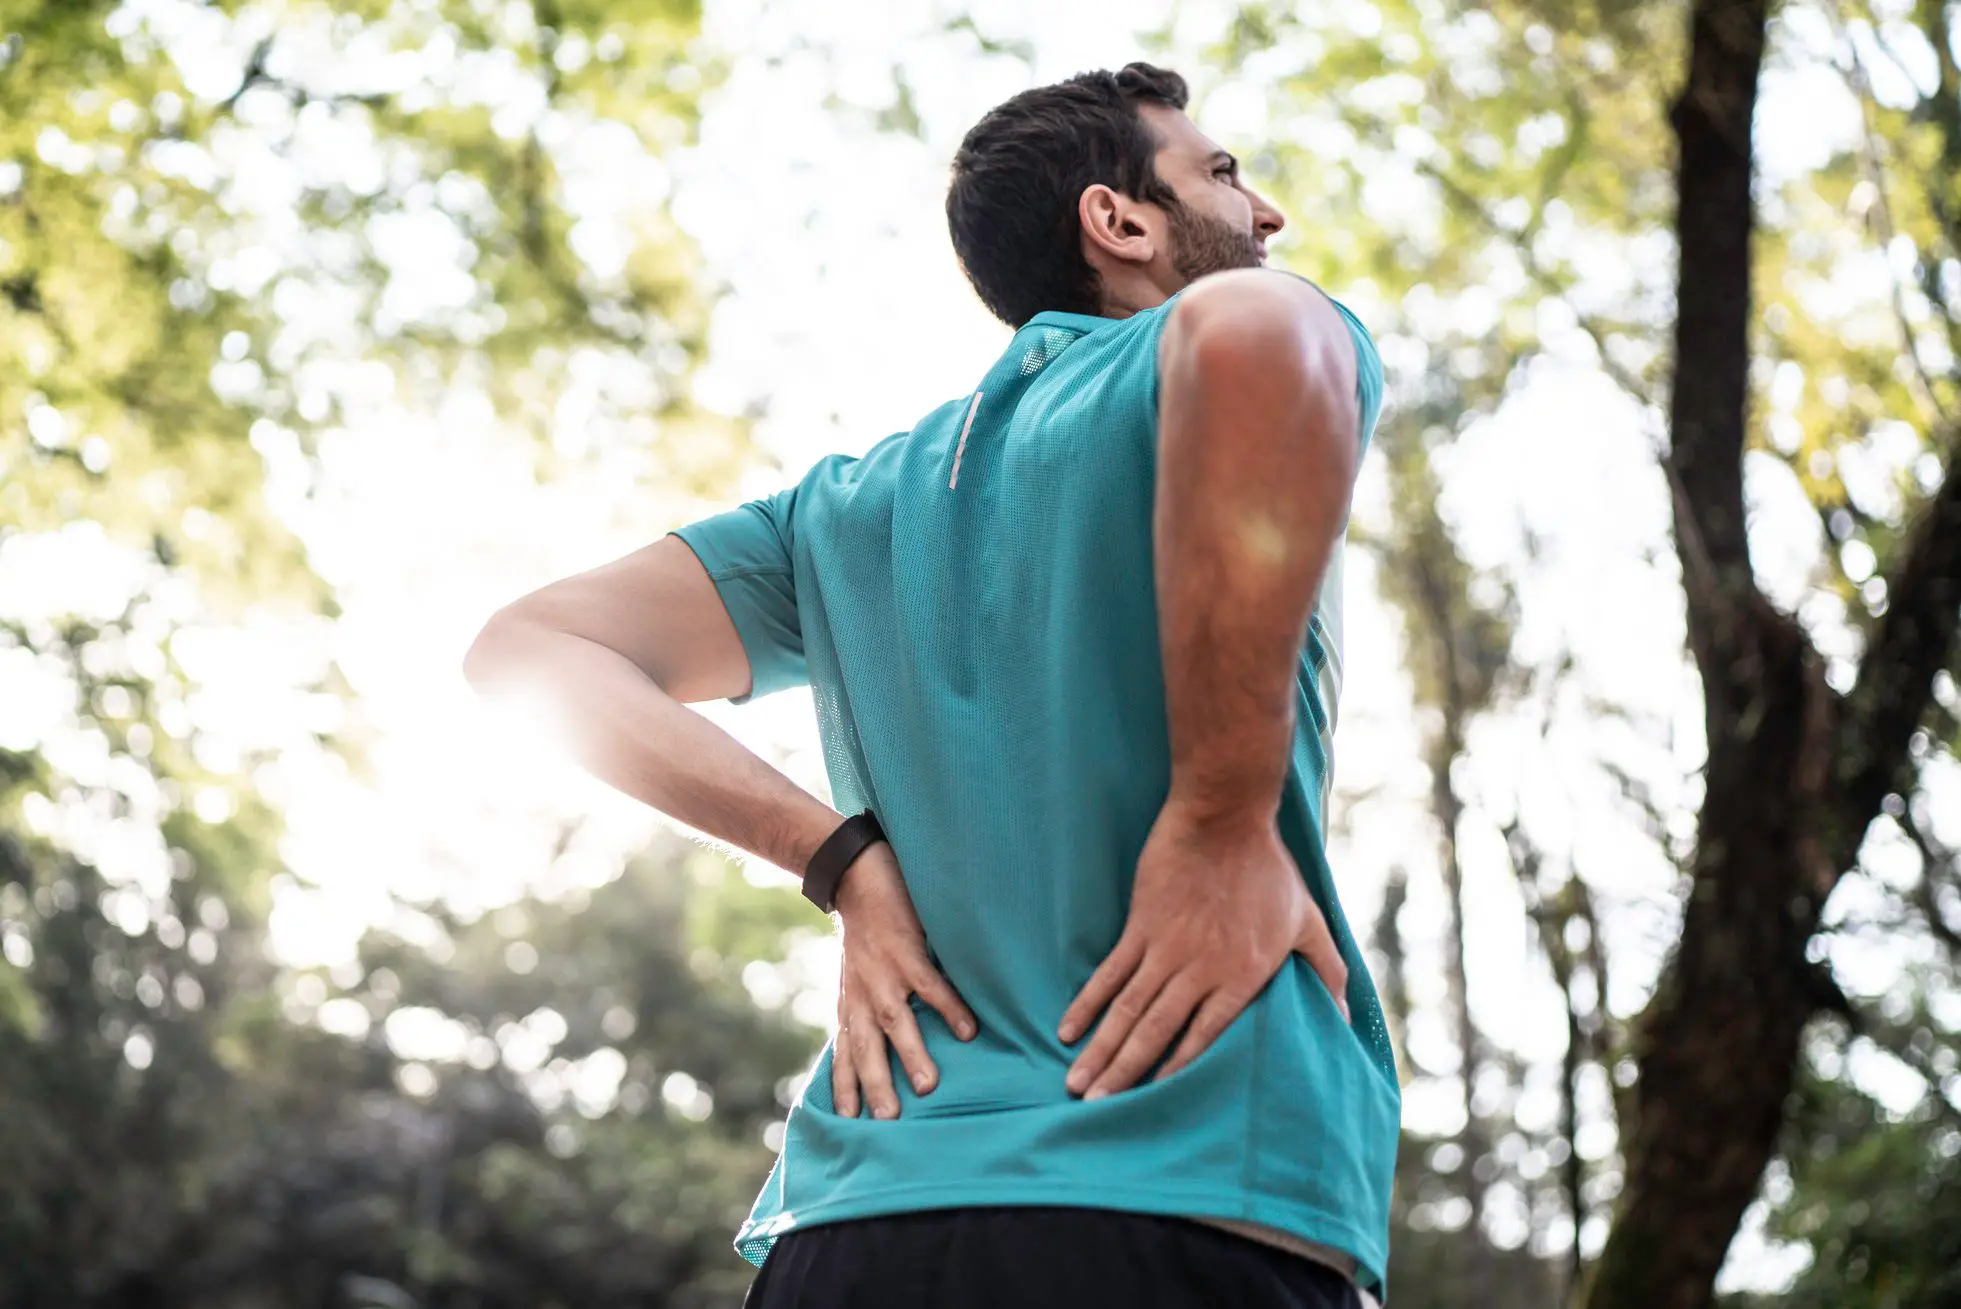 Lower Back Pain When Walking: Causes and Treatments